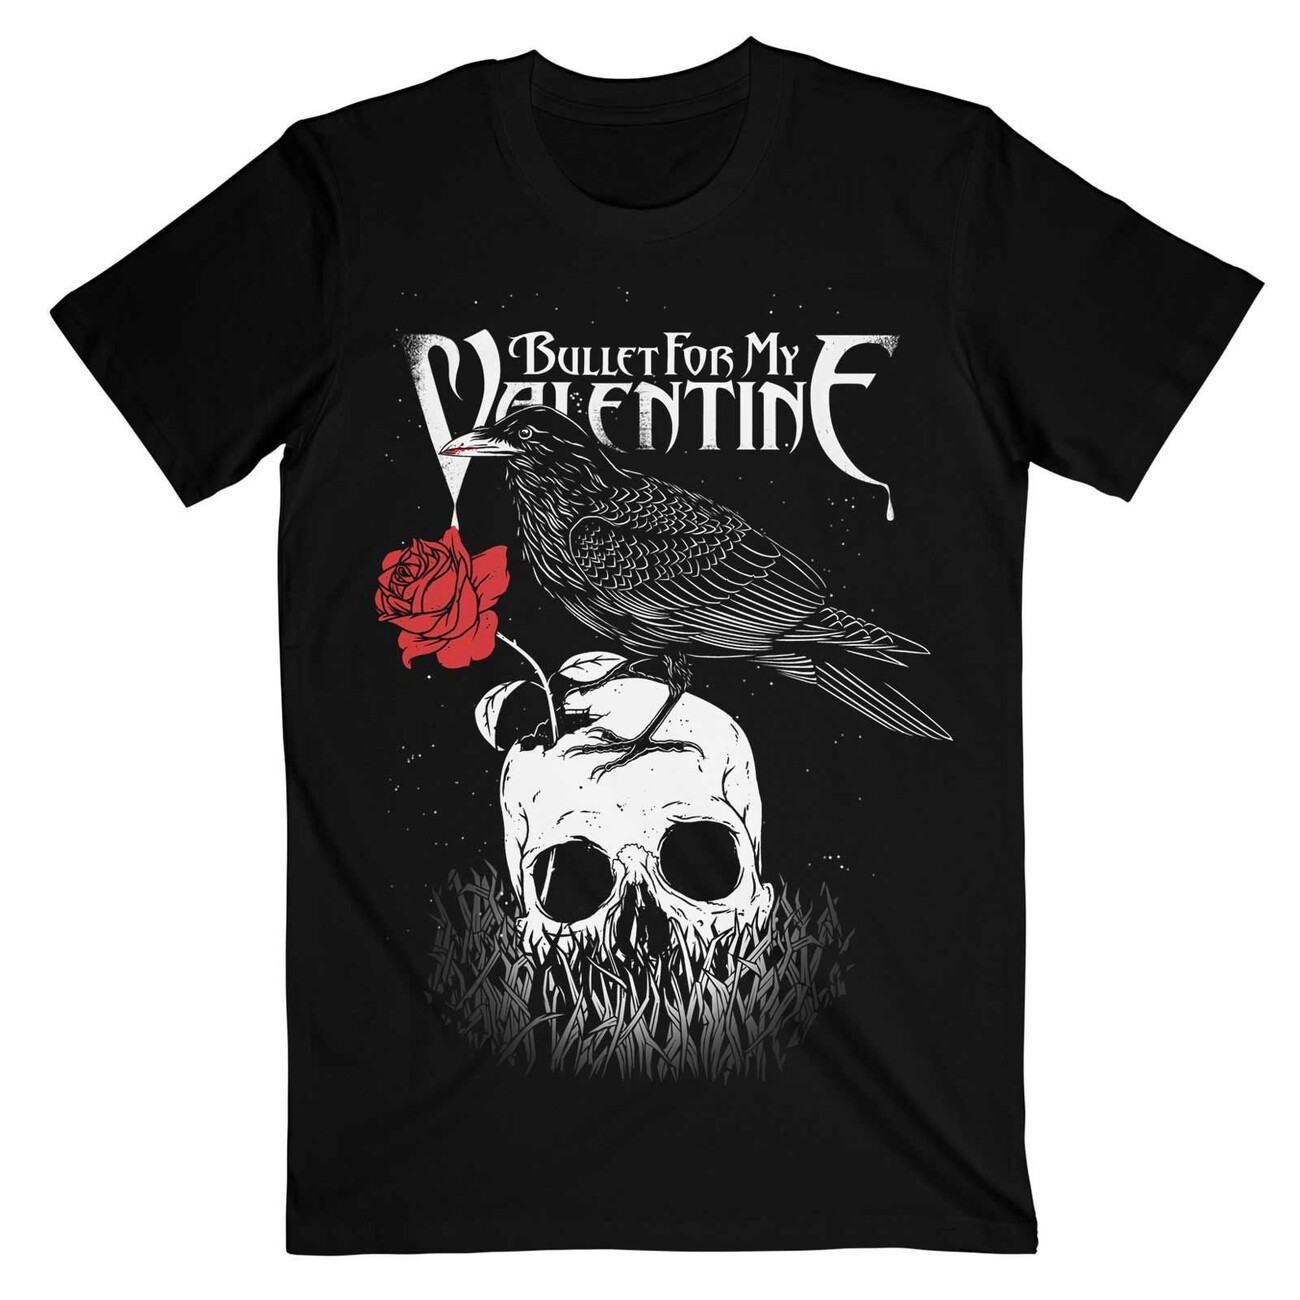 Bullet for My Valentine - Raven | Clothes and accessories for merchandise  fans